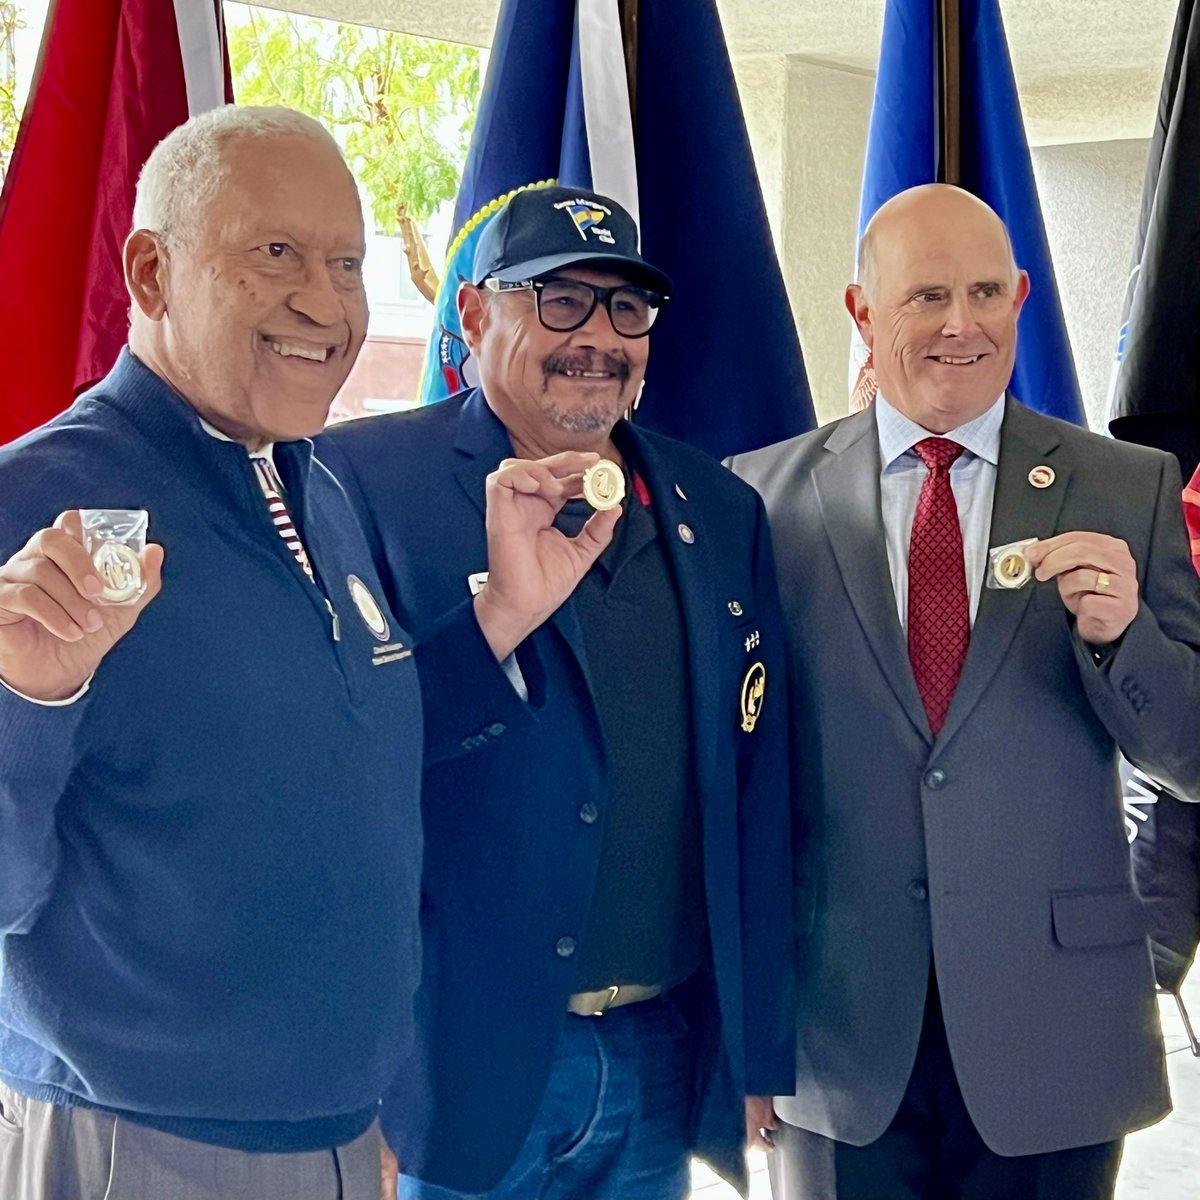 Honored to join & speak at the Vietnam Veterans Recognition event hosted by the VFW, American Legion, USVETS, Riverside County Veterans Services and Veterans Advisory Committee. Thank you for allowing me to participate in recognizing and upholding the legacy of those who served.